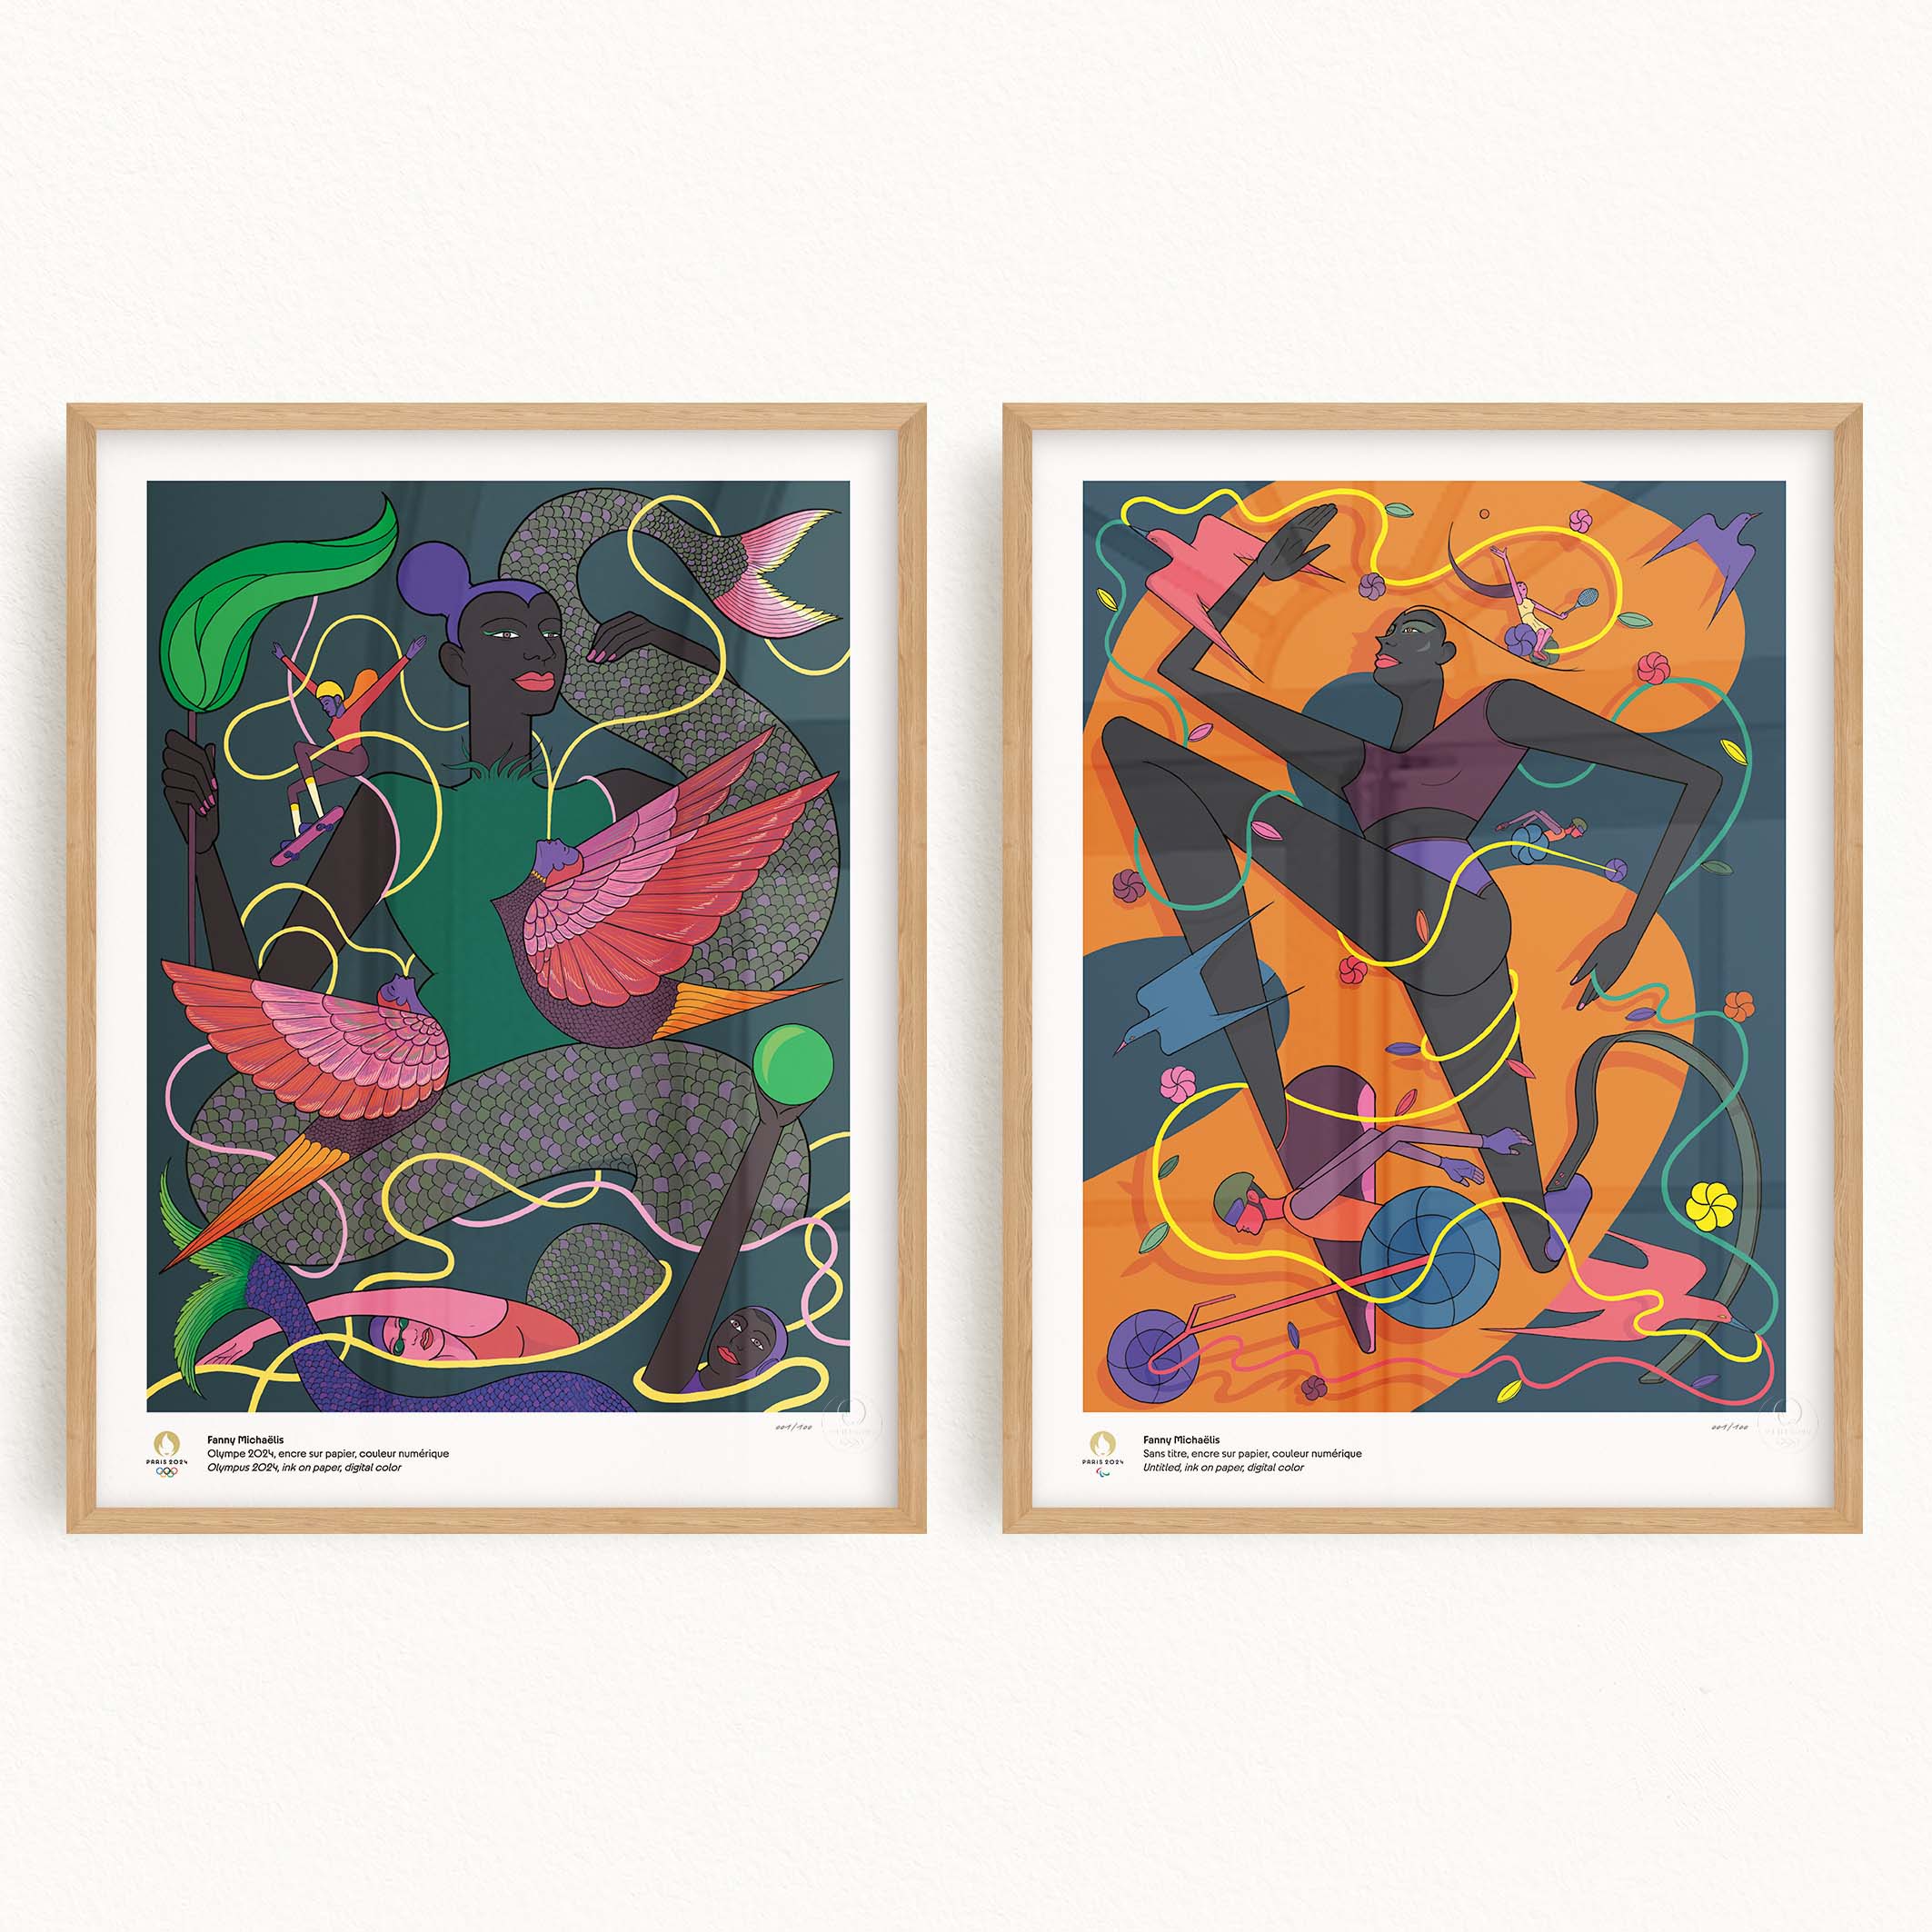 Diptych of Paris 2024 artistic posters for the Olympic and Paralympic Games by Fanny Michaëlis 